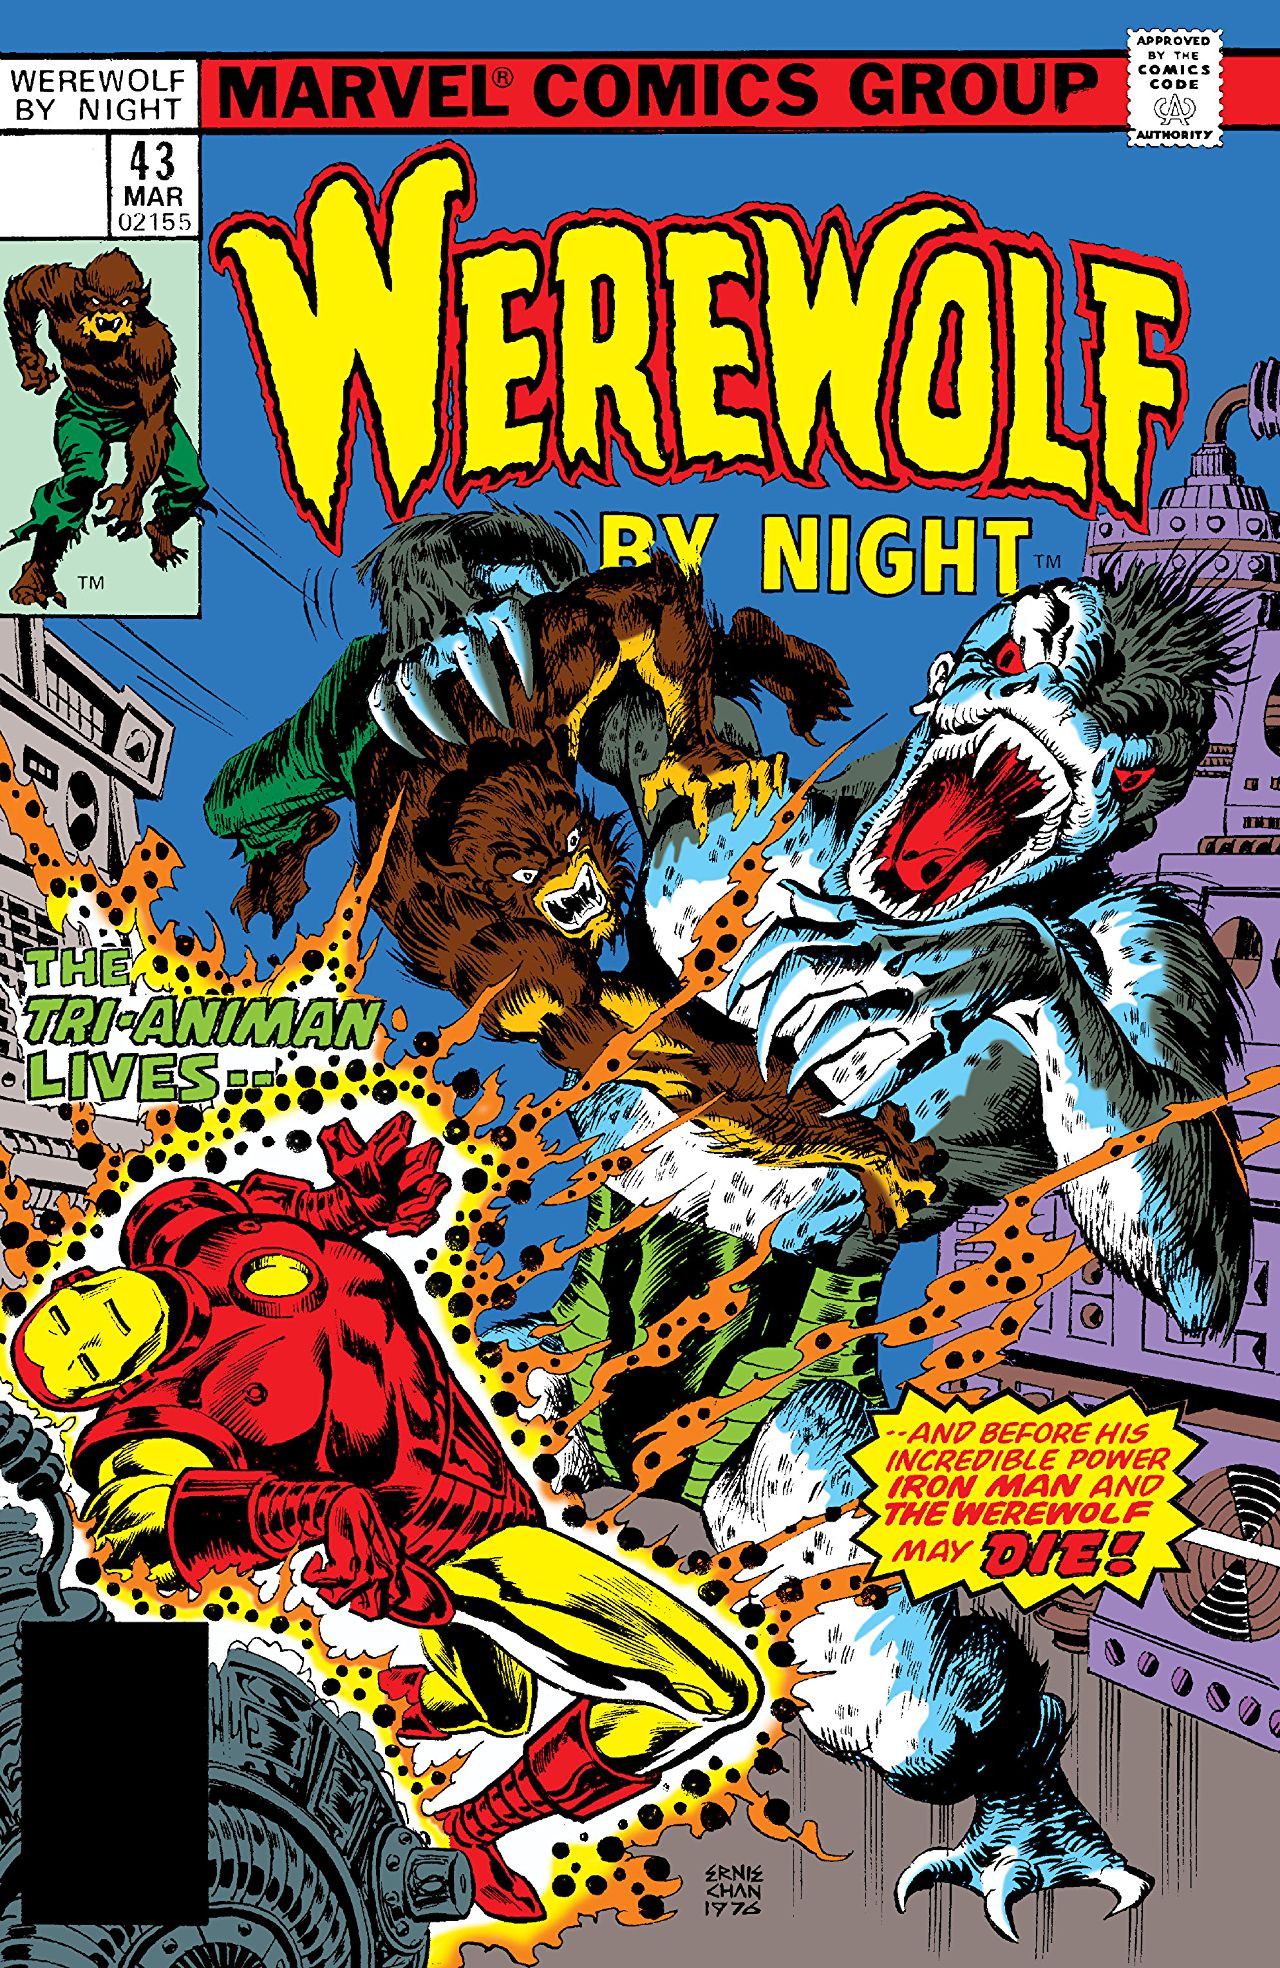 characters in werewolf by night